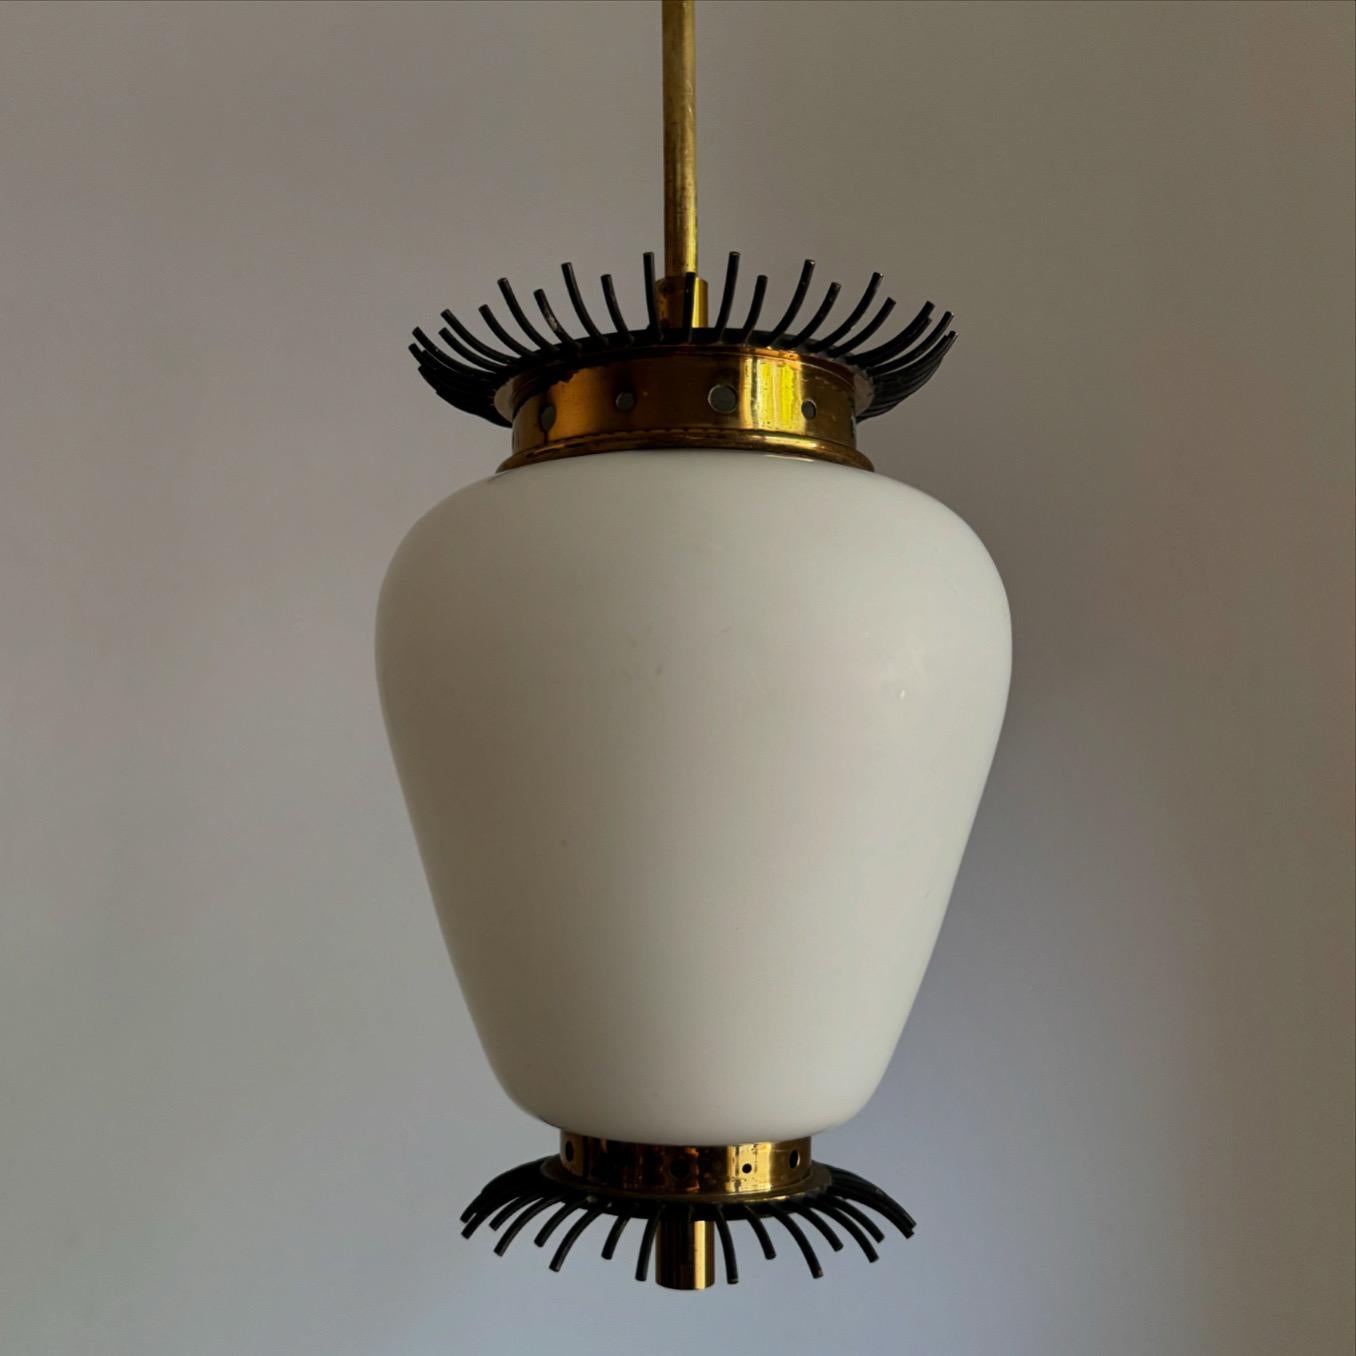 Beautiful and unique pendant light / lantern, manufactured in lacquered metal, brass and opaline glass, this lamp is made very much in the manner those designed by Angelo Lelii's for Arredoluce.
The lantern holds one e27 bulb.
Measurements:
Total